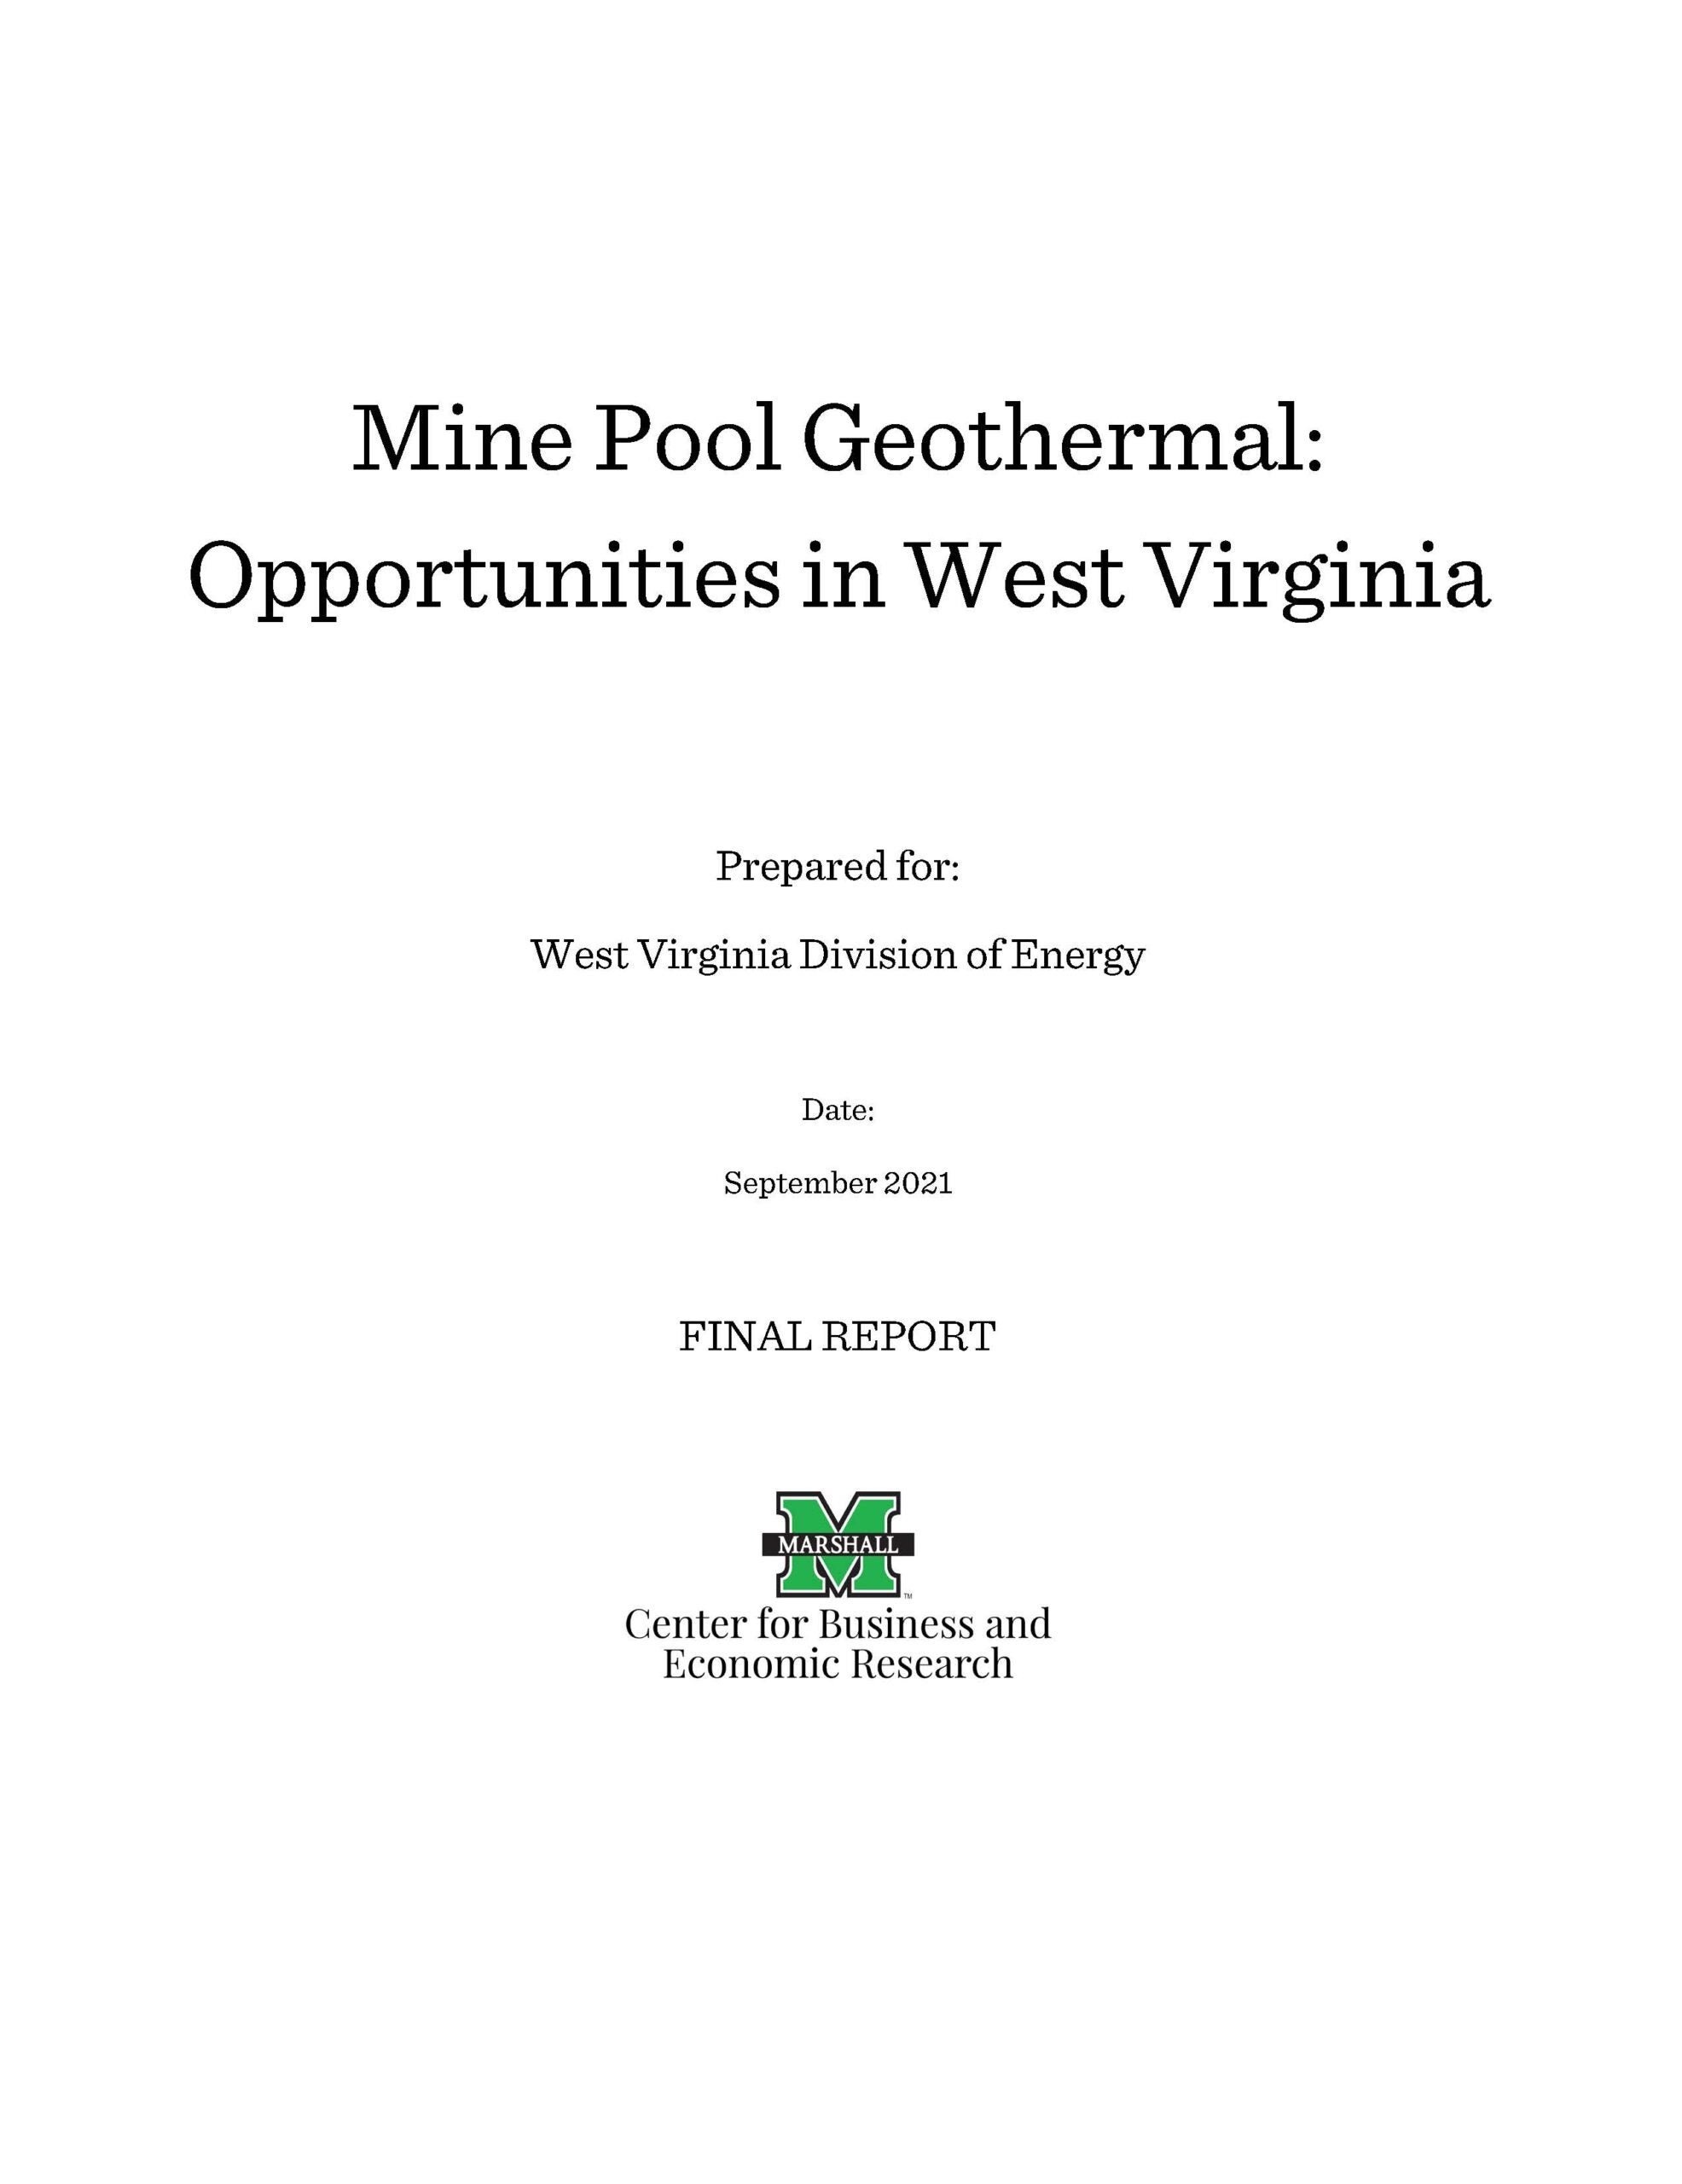 2021_09_Minepool_Geothermal_Opportunities_in_WV_Page_01